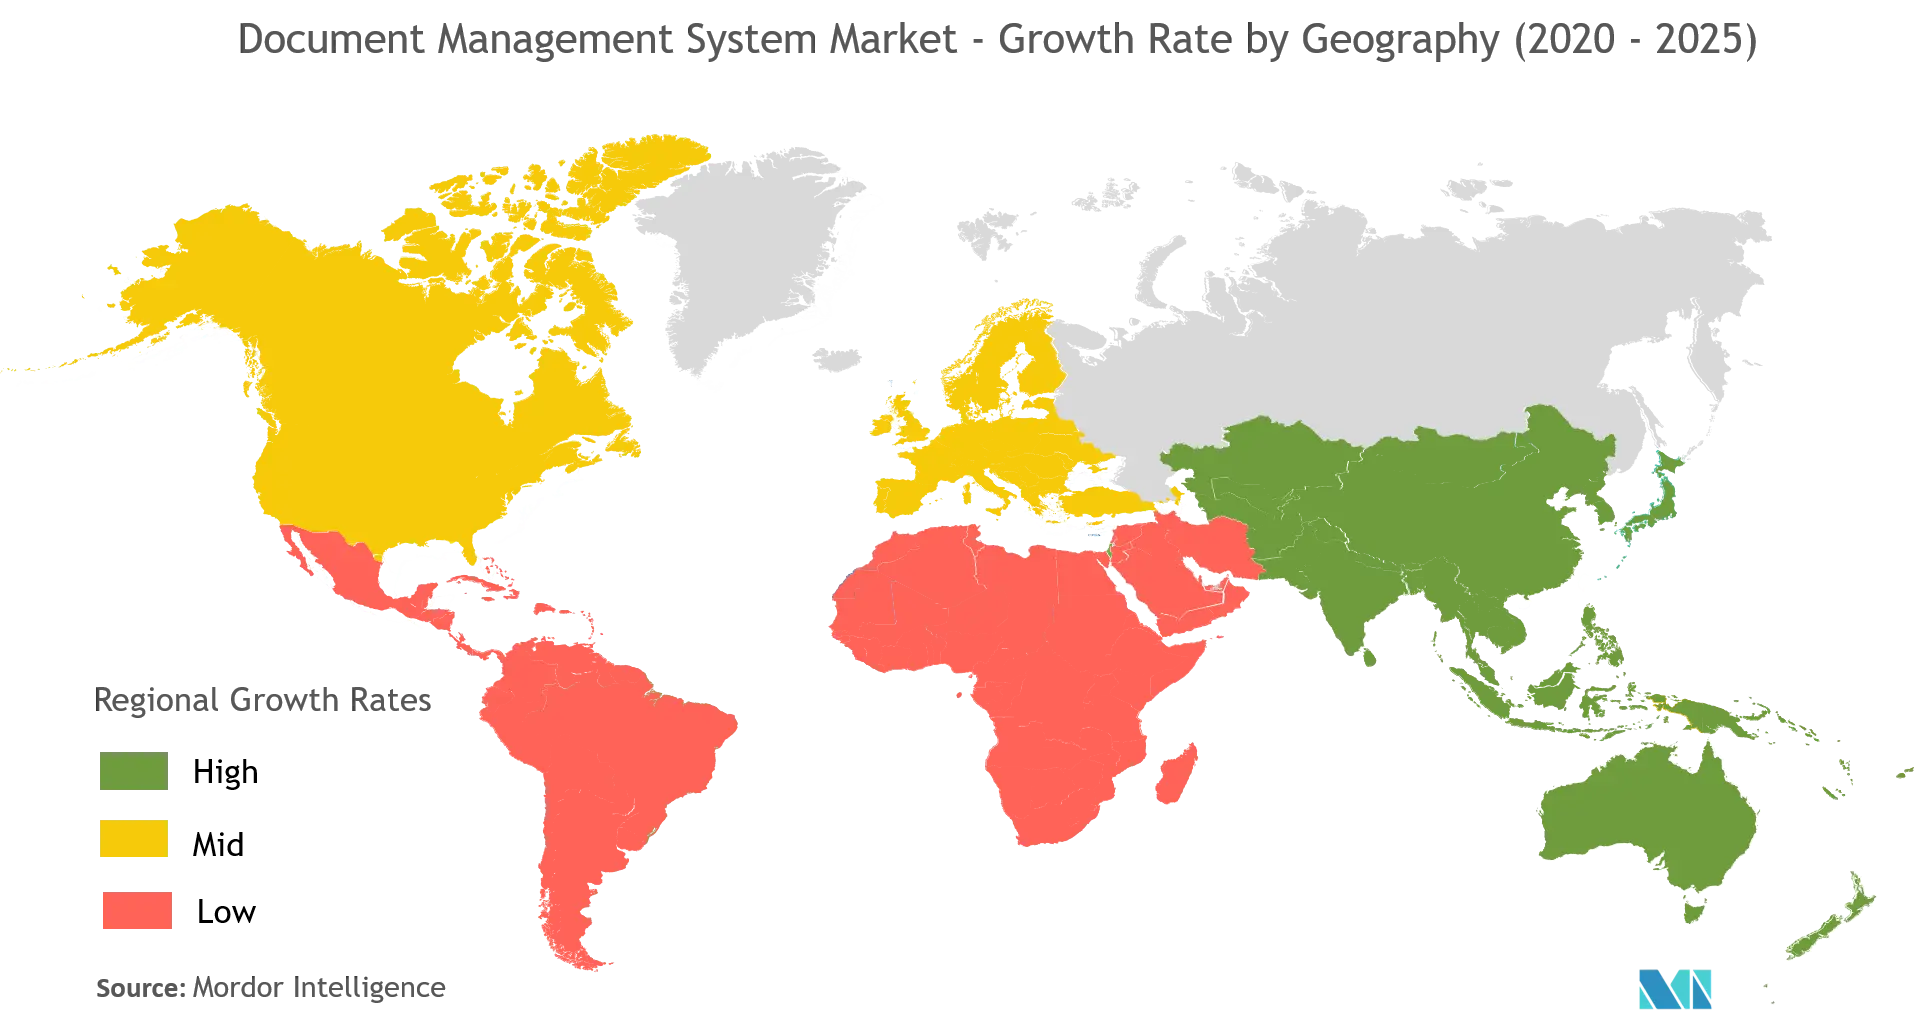 Document Management Systems Market Growth Rate